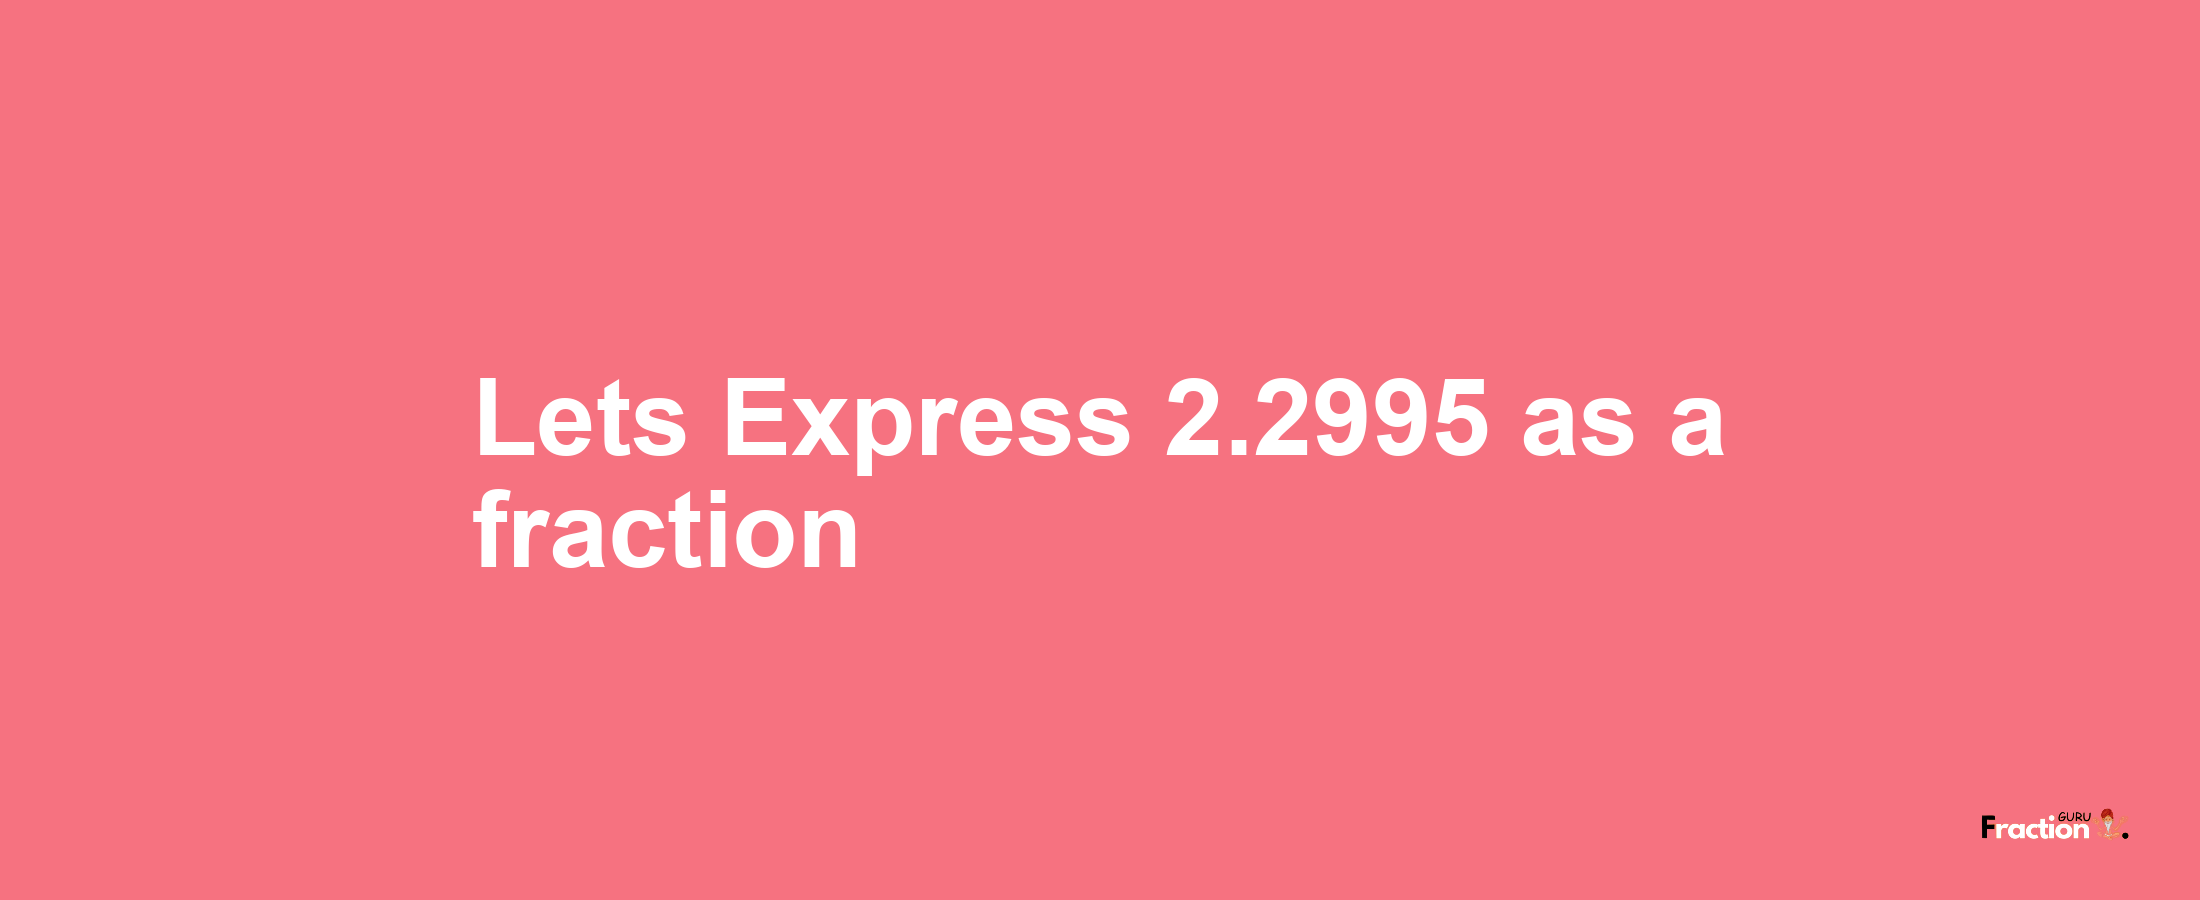 Lets Express 2.2995 as afraction